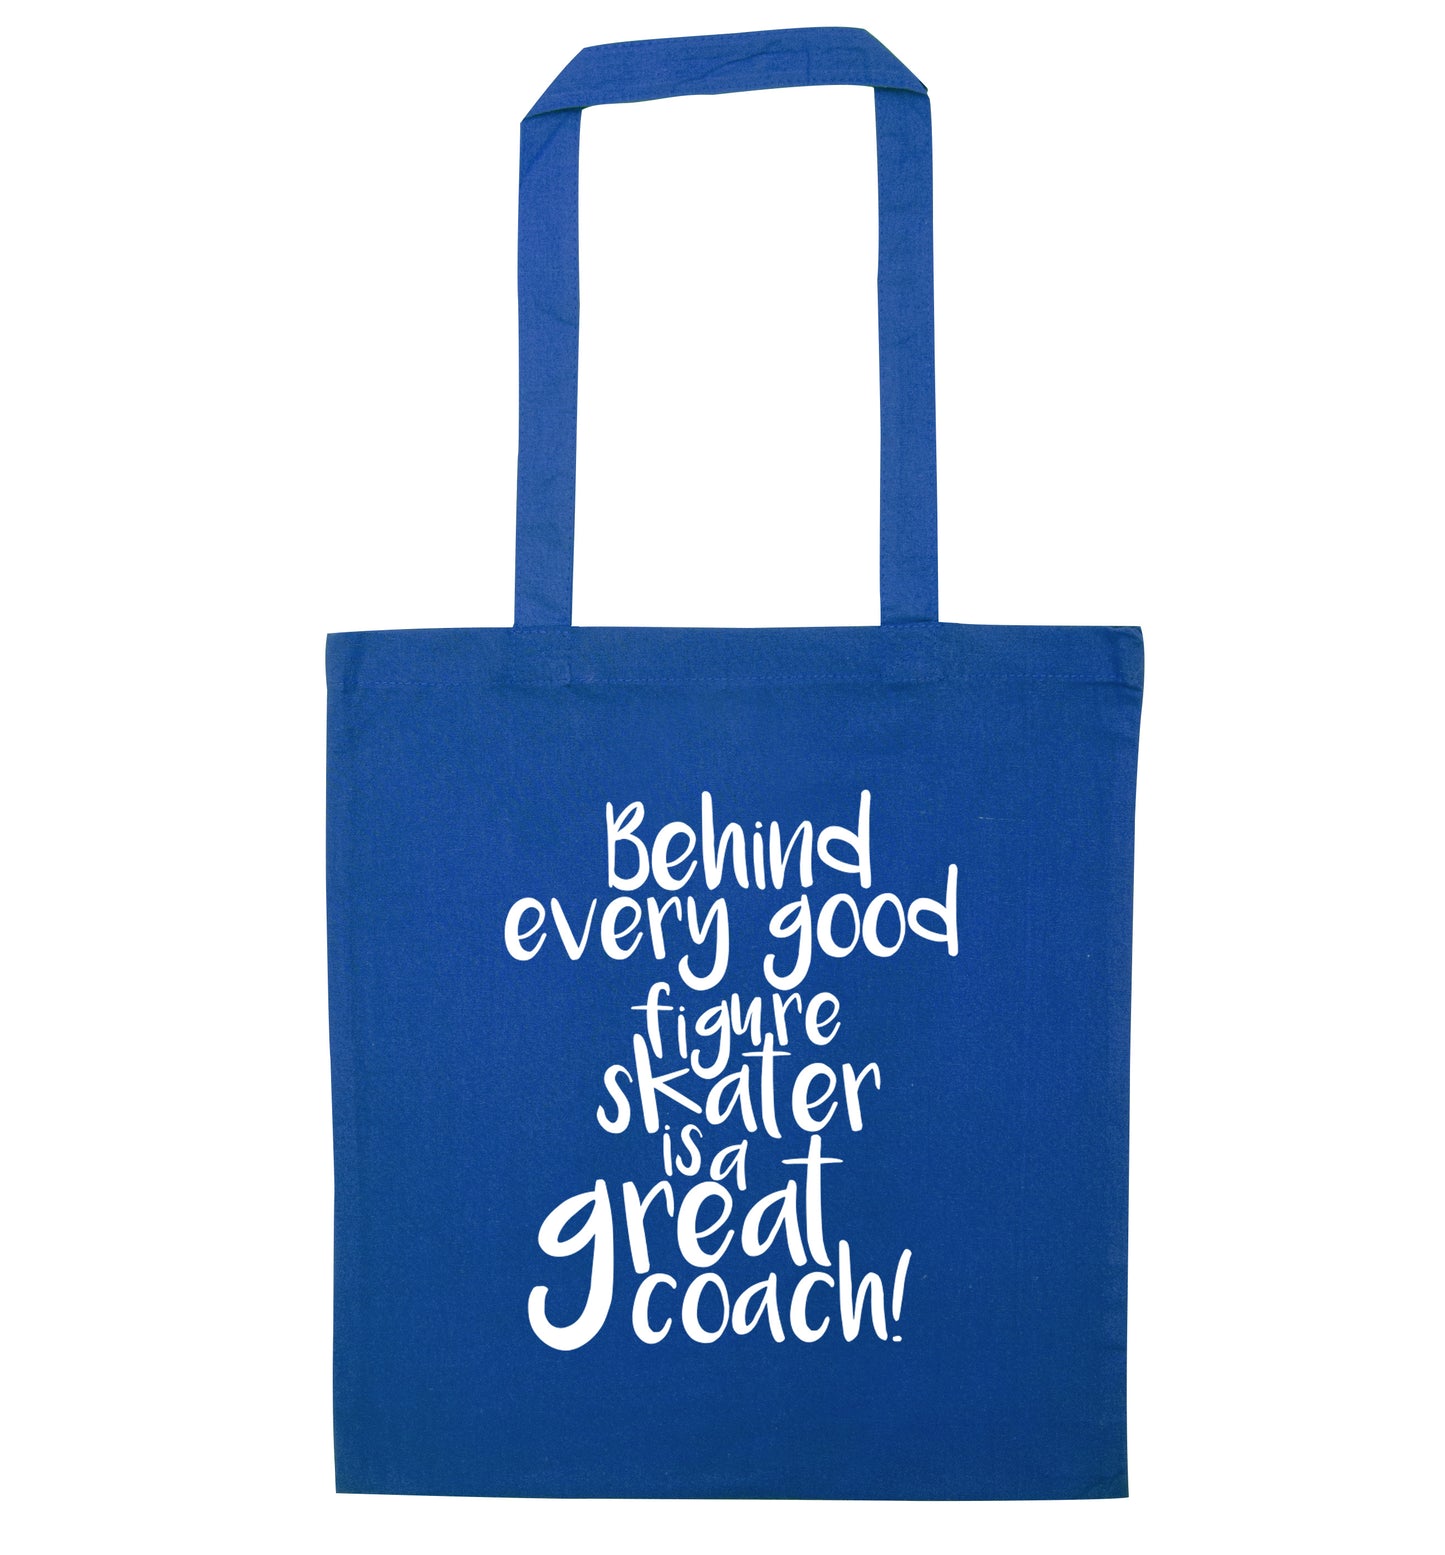 Behind every good figure skater is a great coach blue tote bag